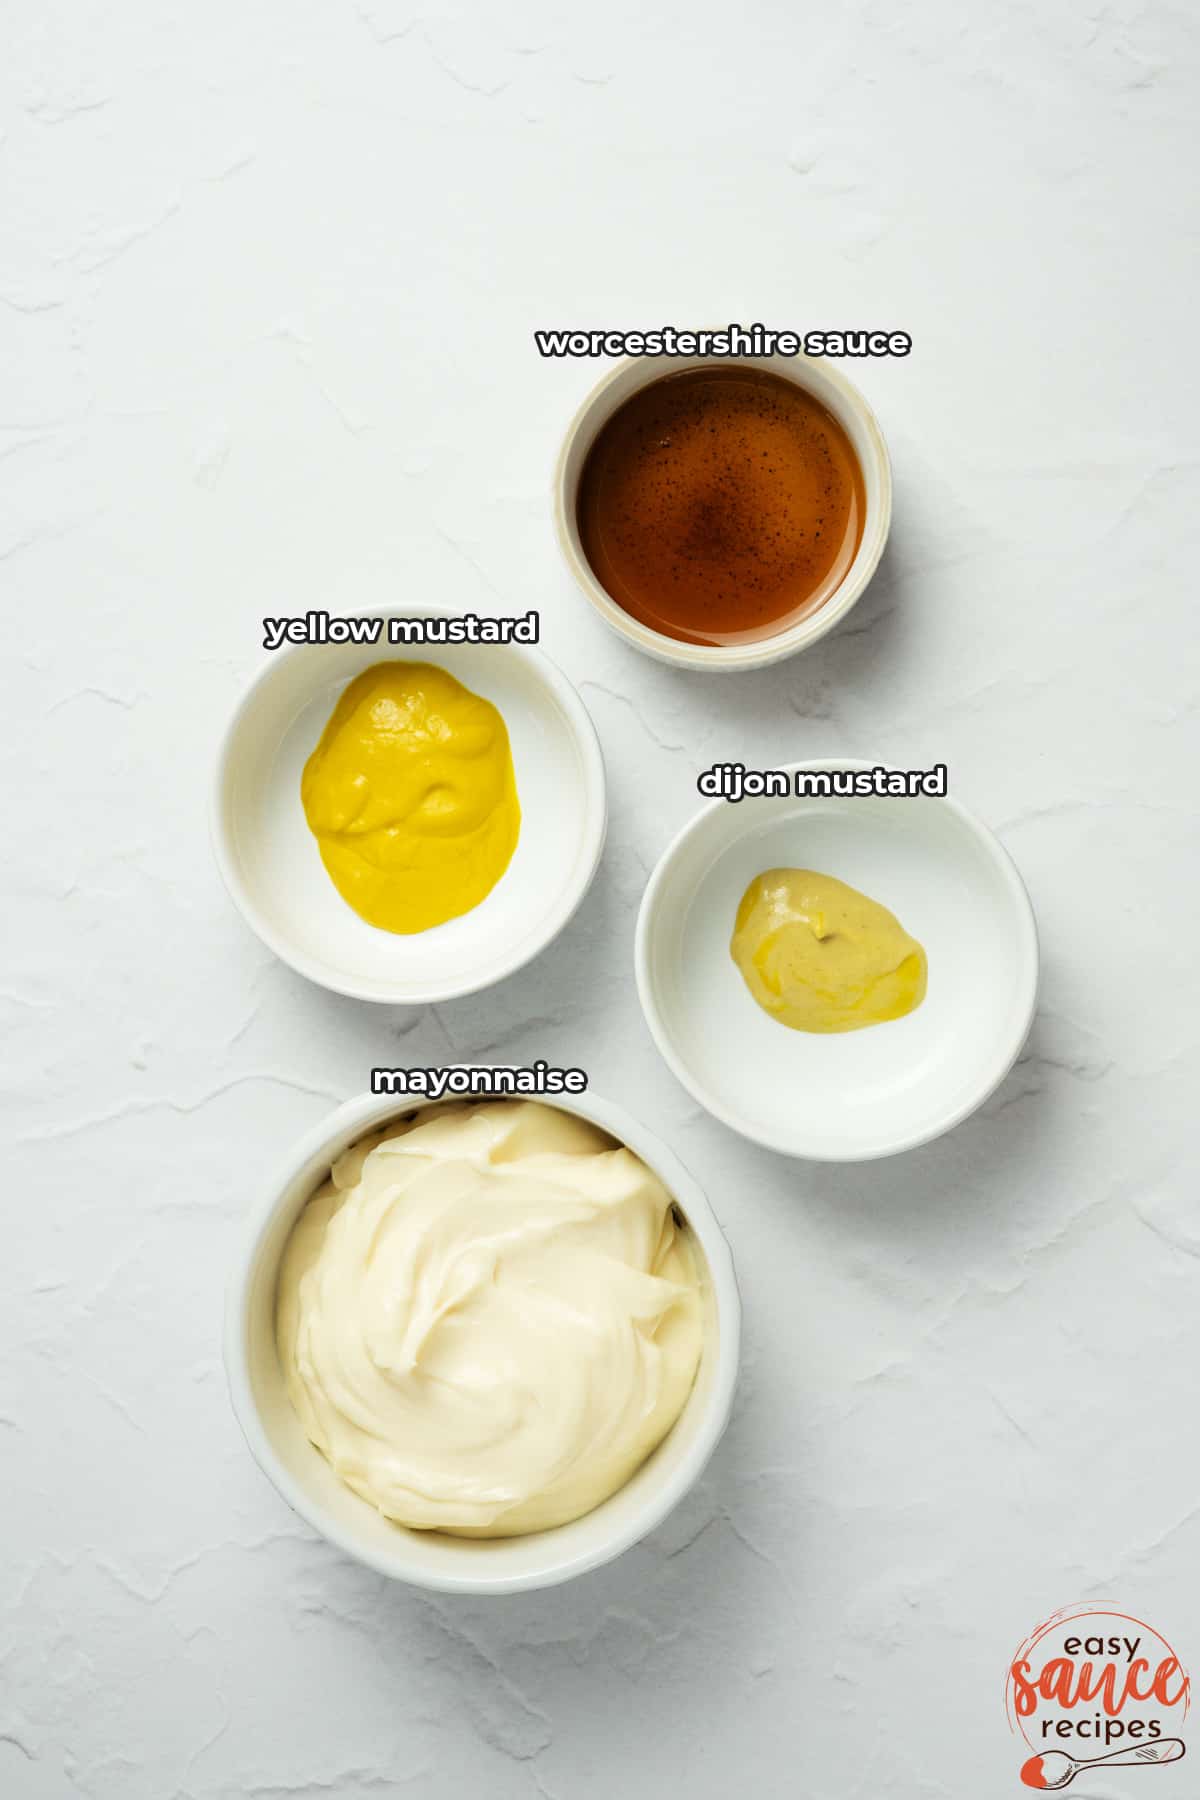 ingredients for mayo mustard sauce with labels